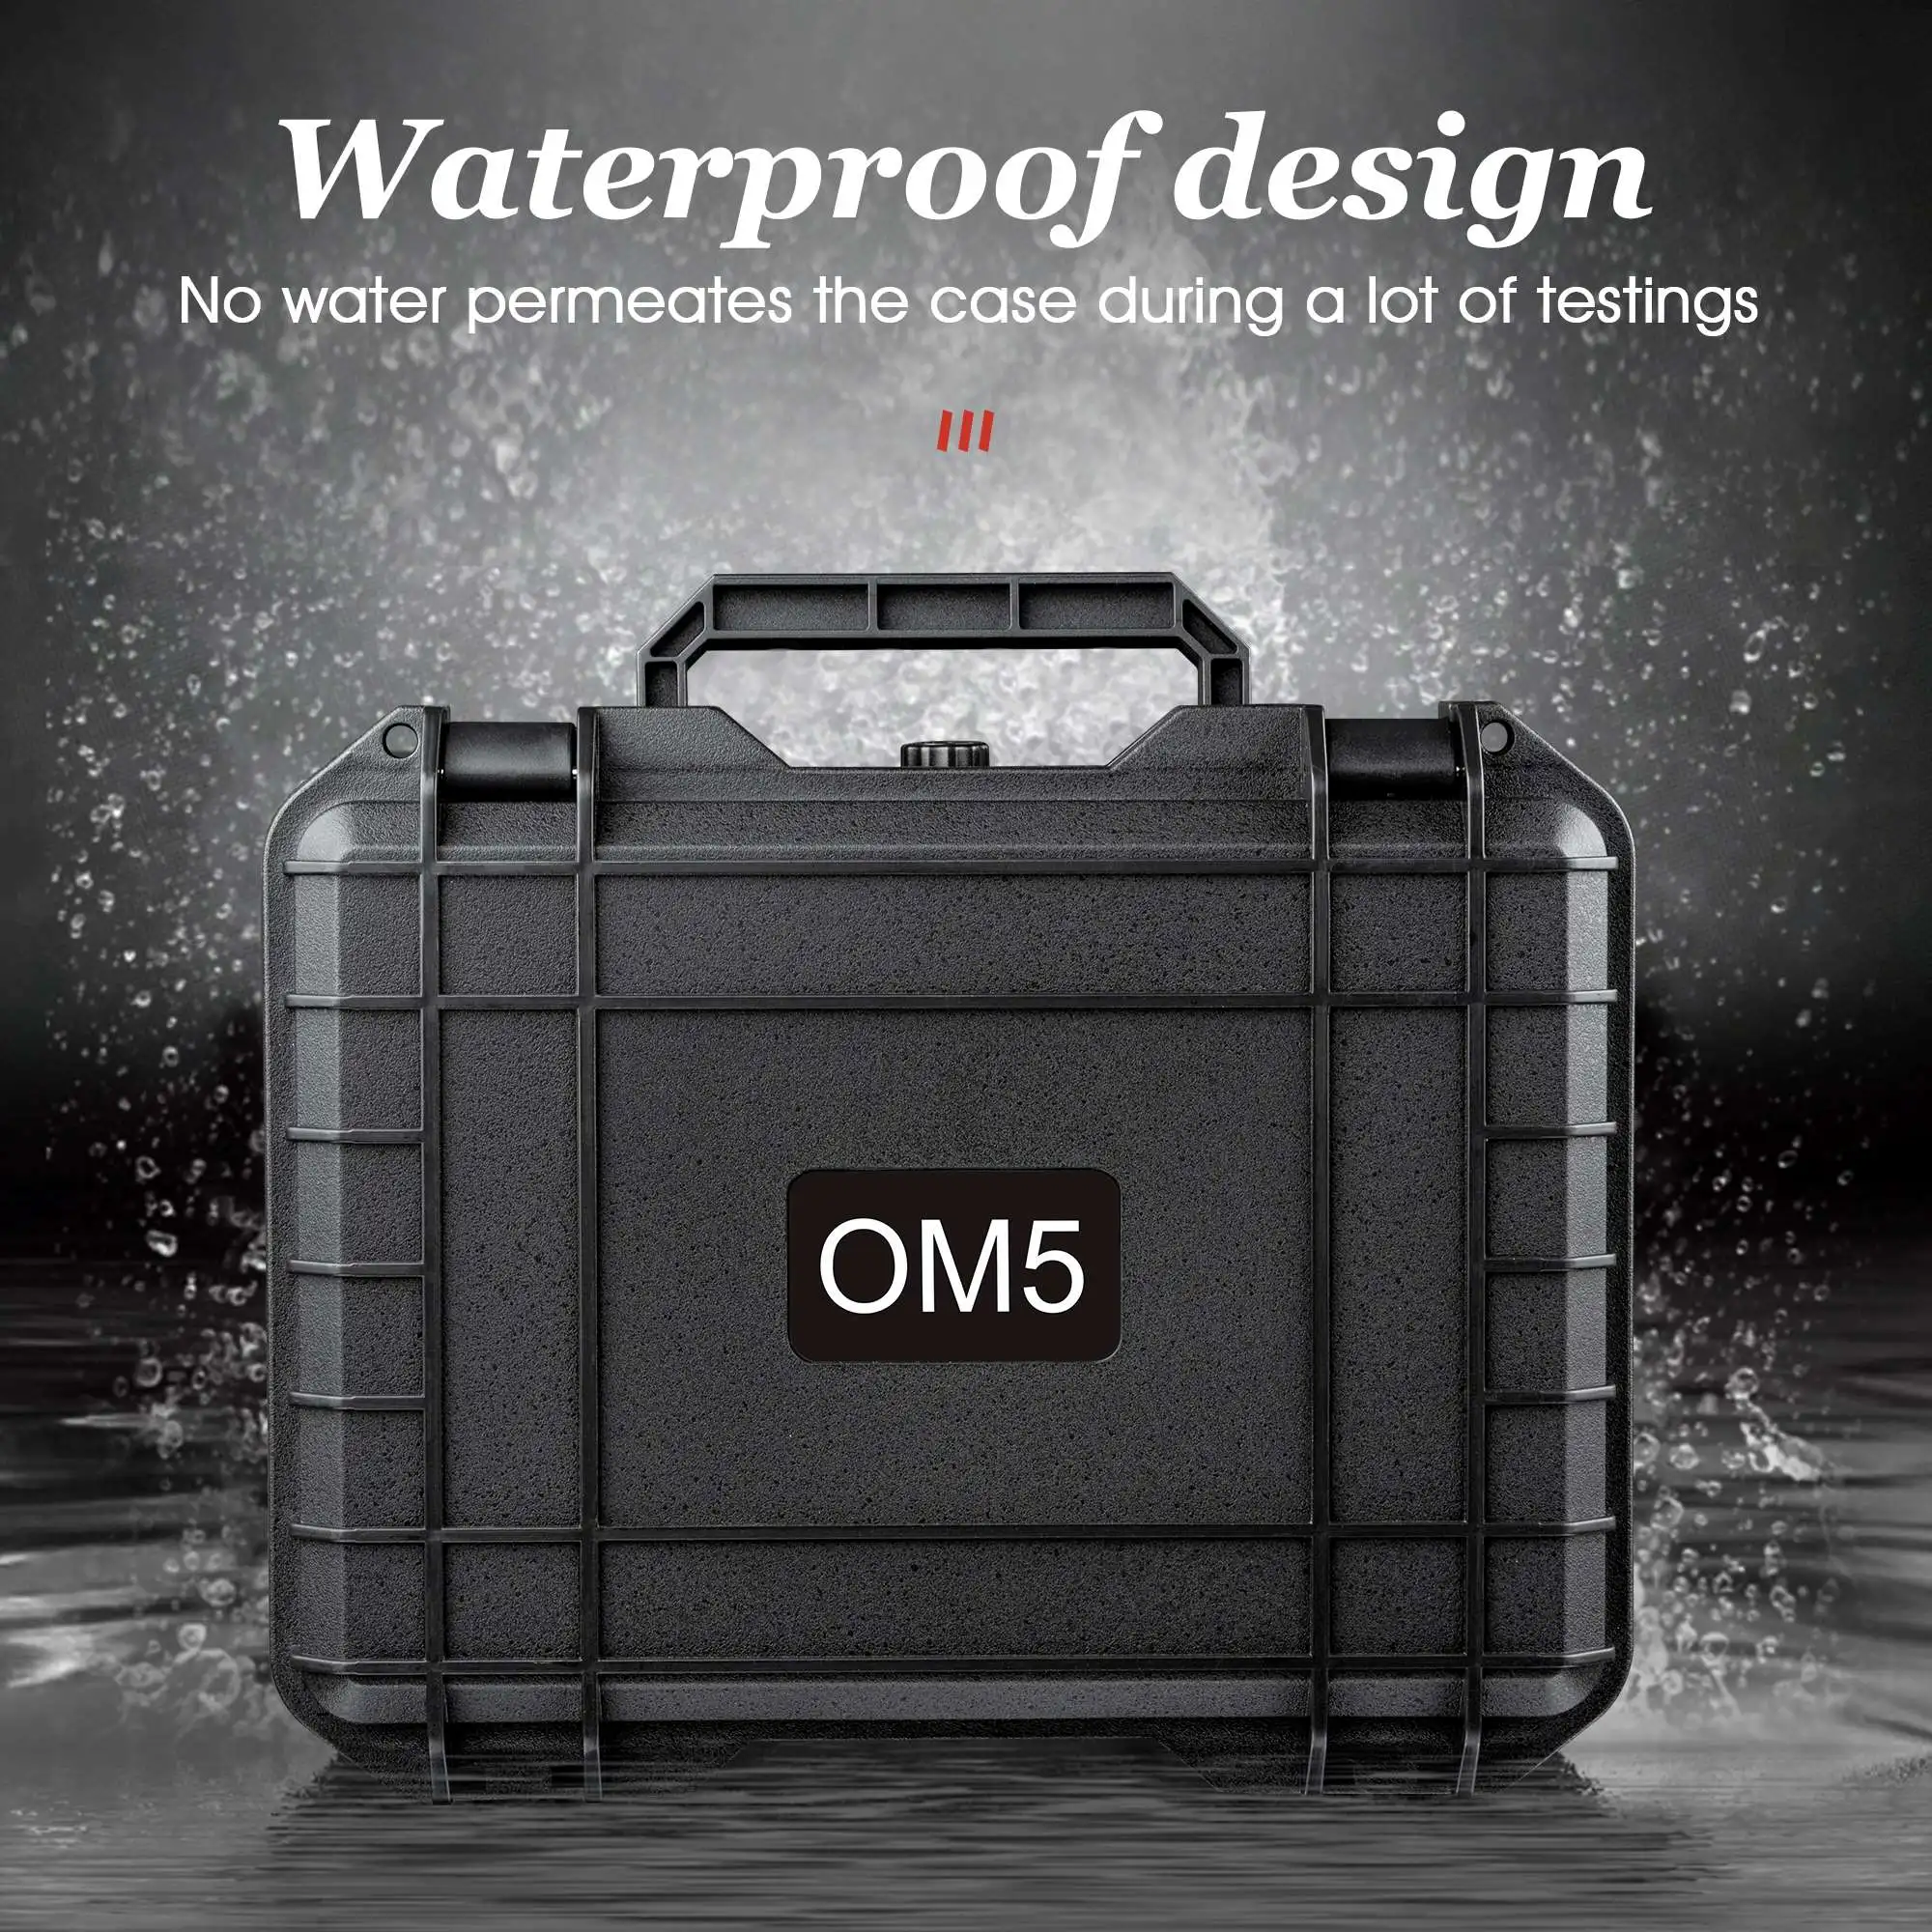 

DJI OM5 Portable Suitcase Carrying Case Waterproof Explosion-proof Storage Box PU Shoulder Bag for DJI Osmo Mobile 5 Accessories